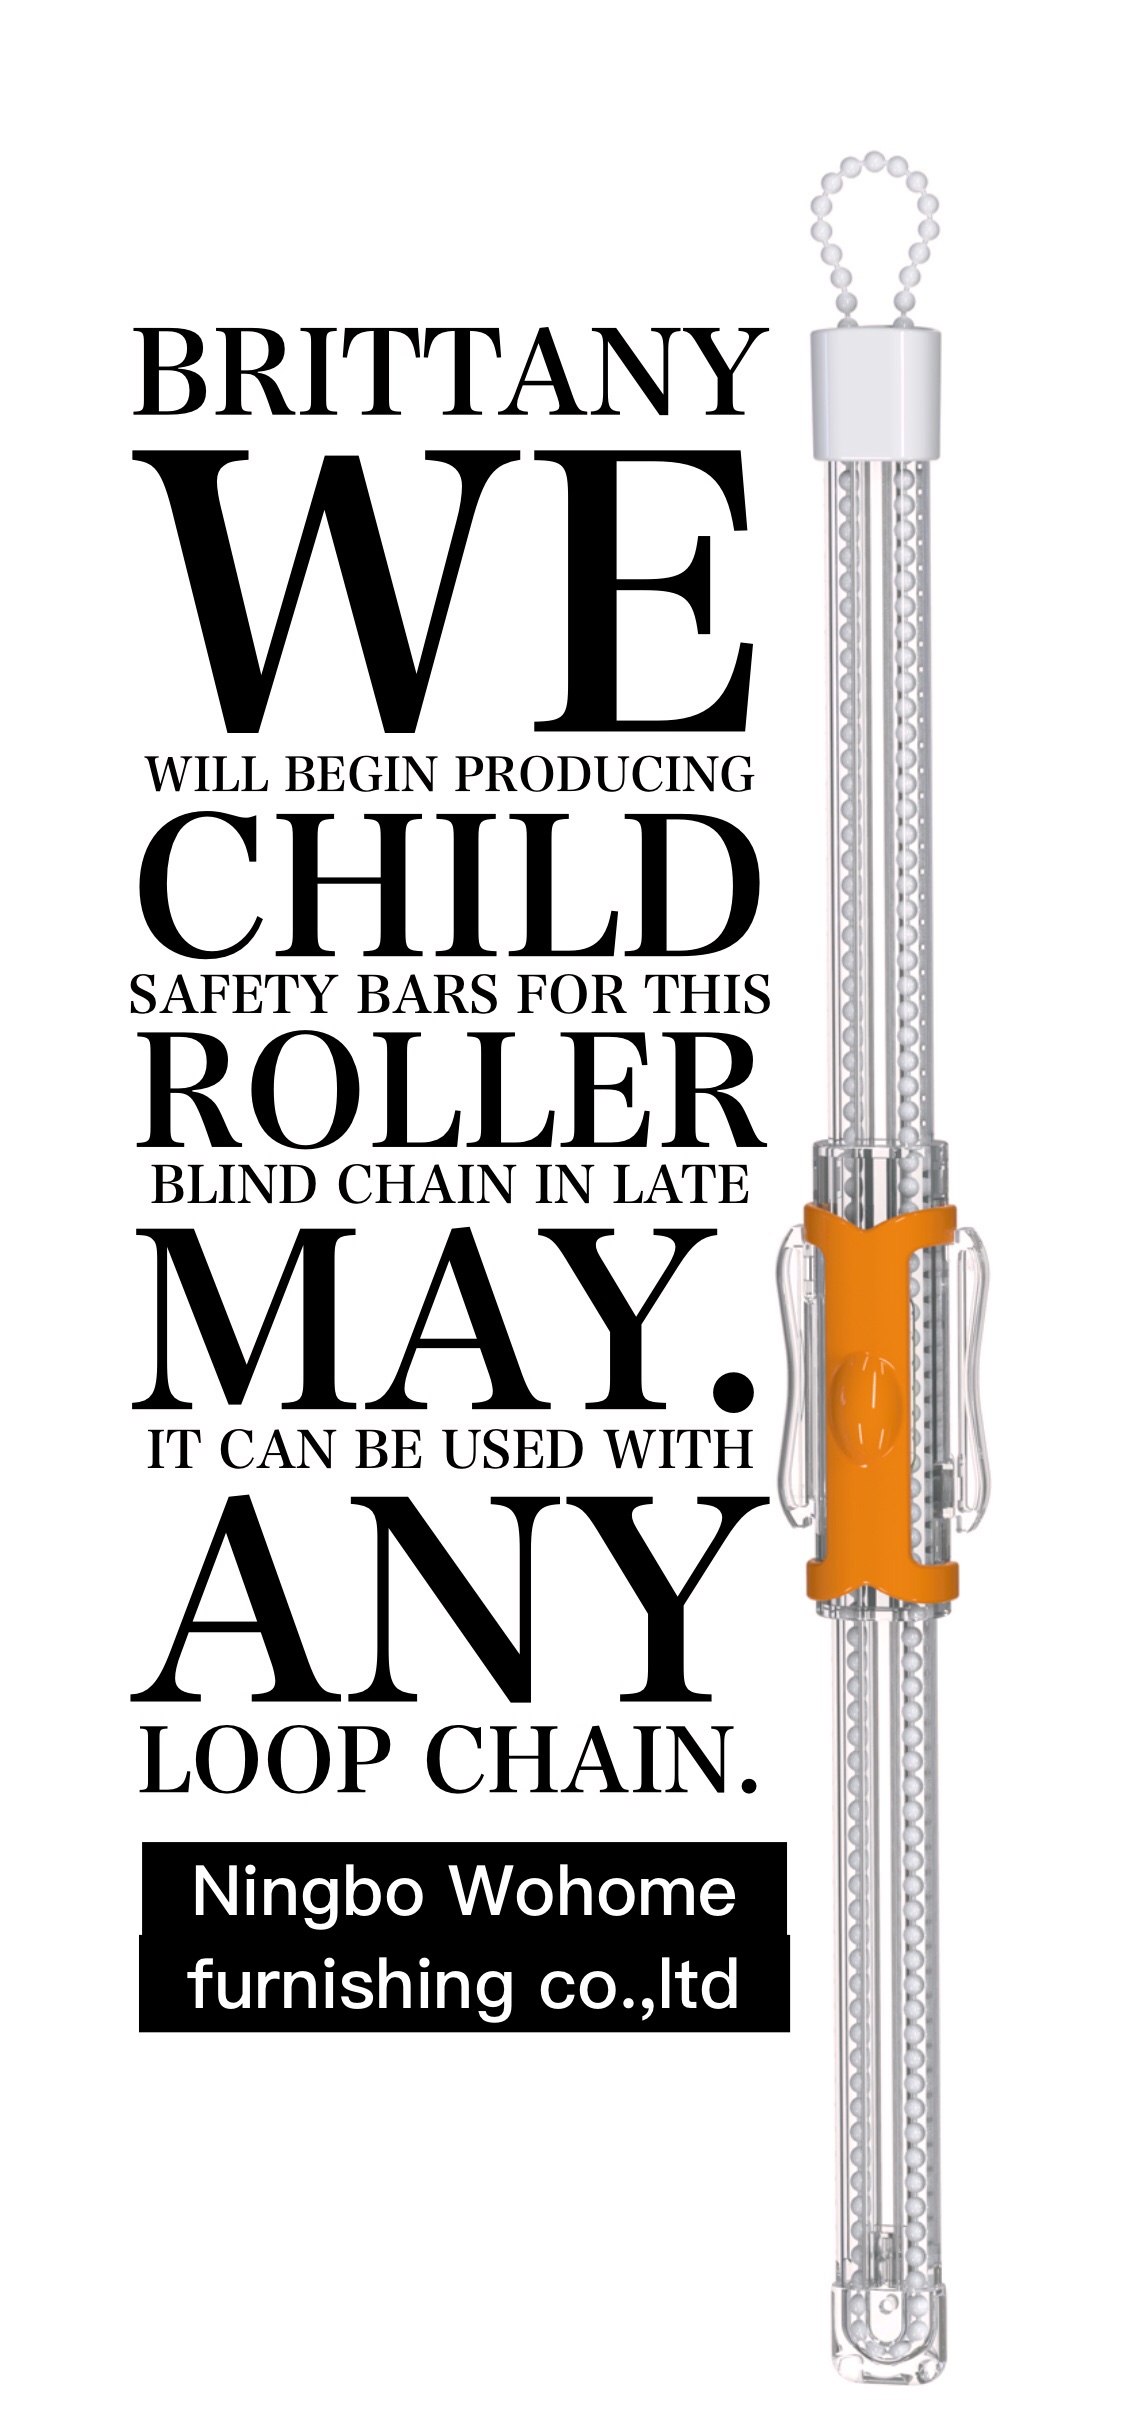 WB-CS19 bead chain safety auxiciary device